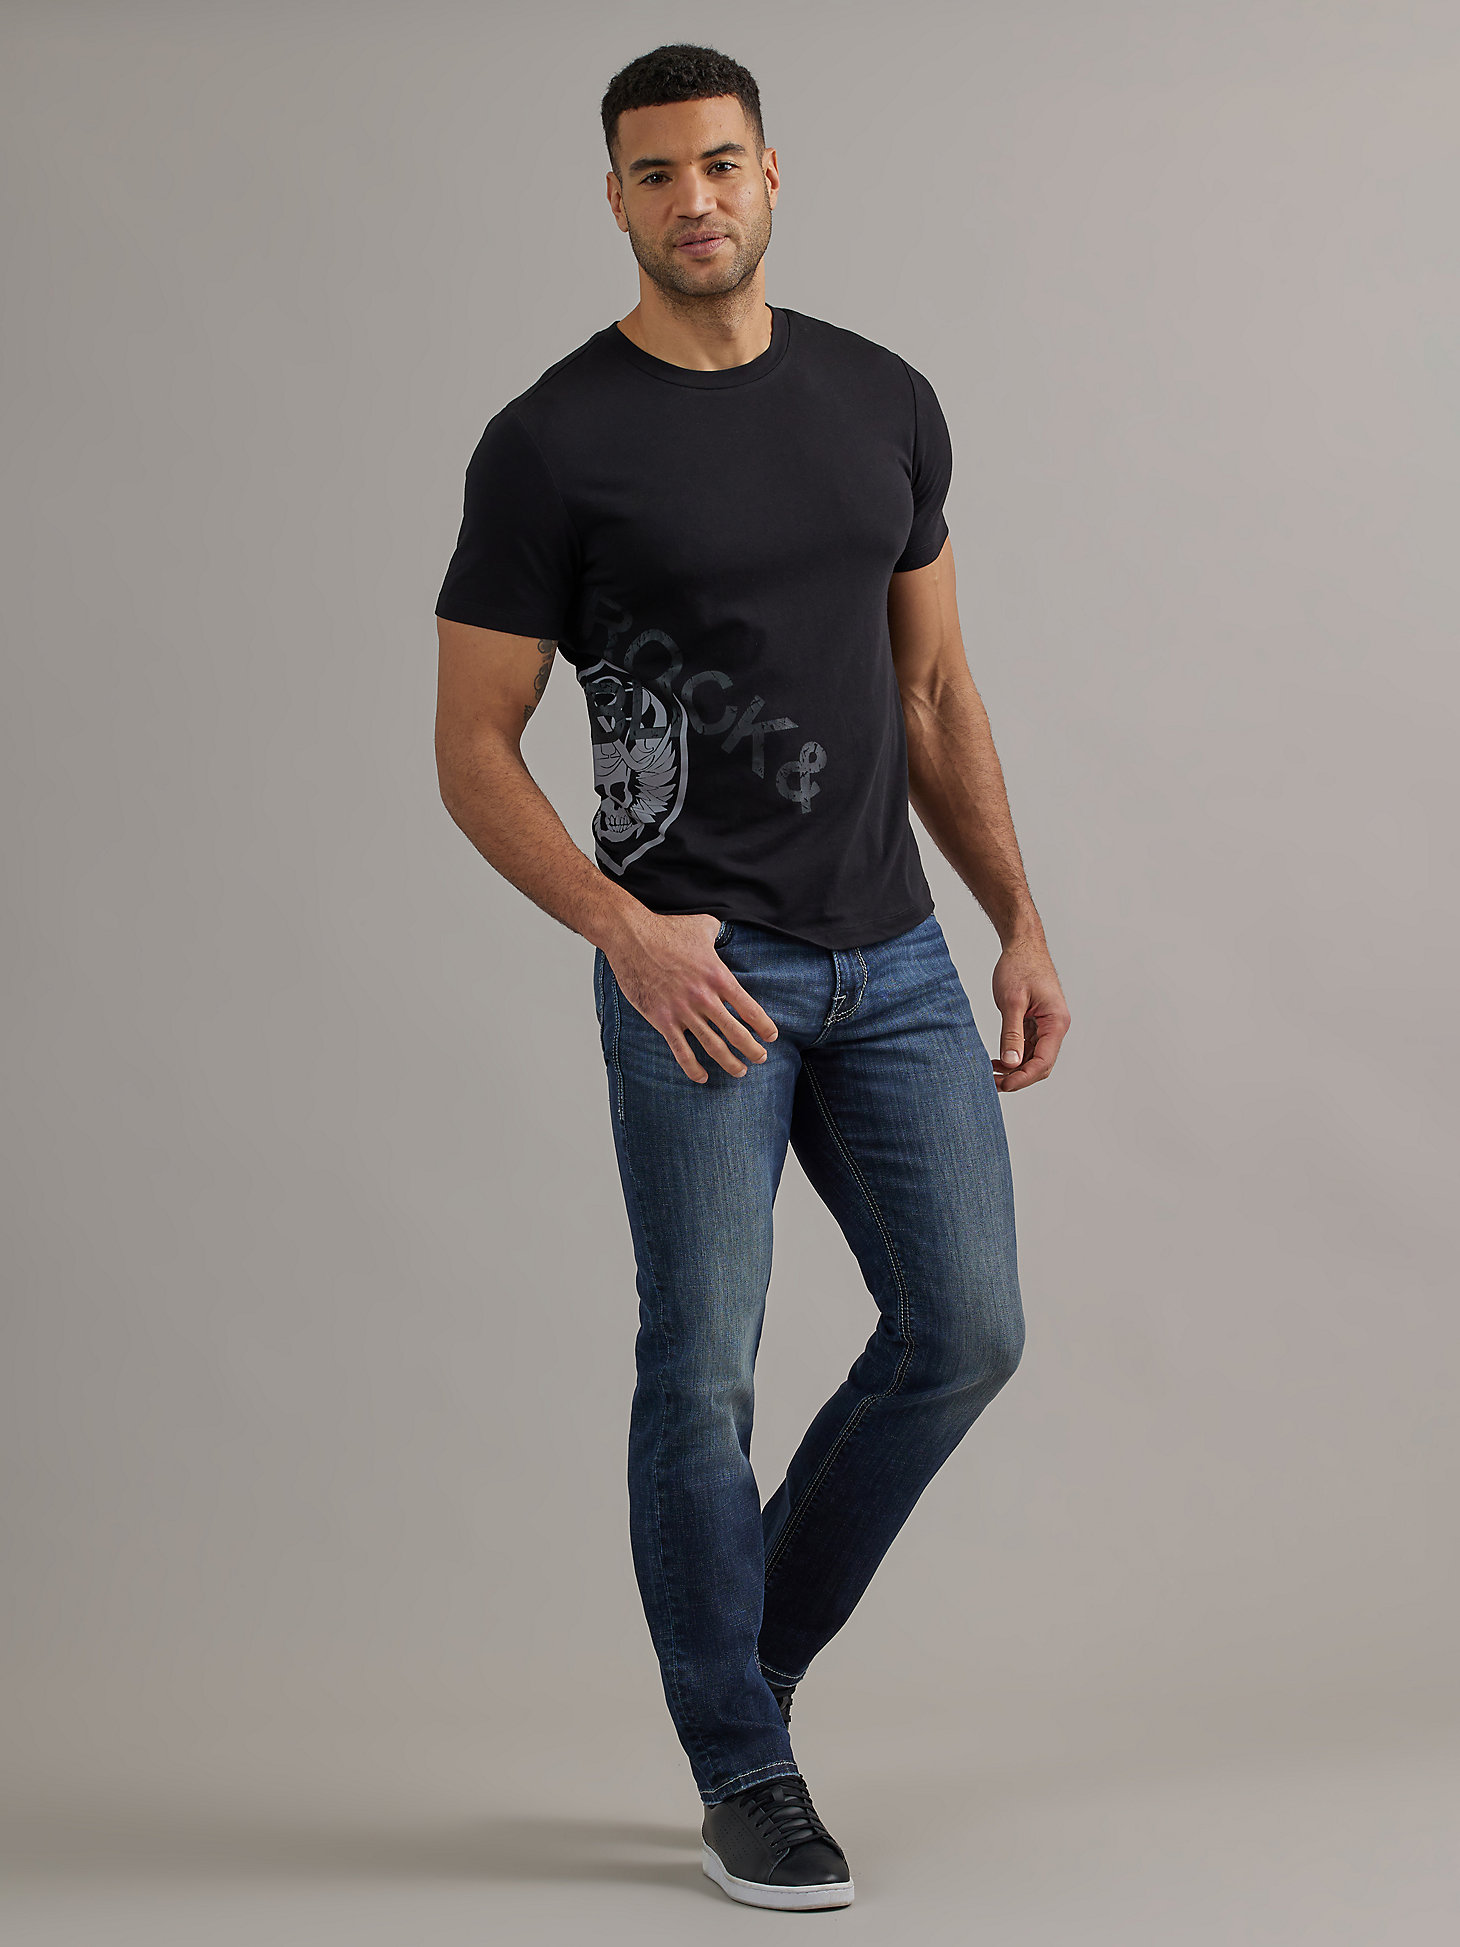 Short Sleeve Side Skull Graphic Tee in Black main view